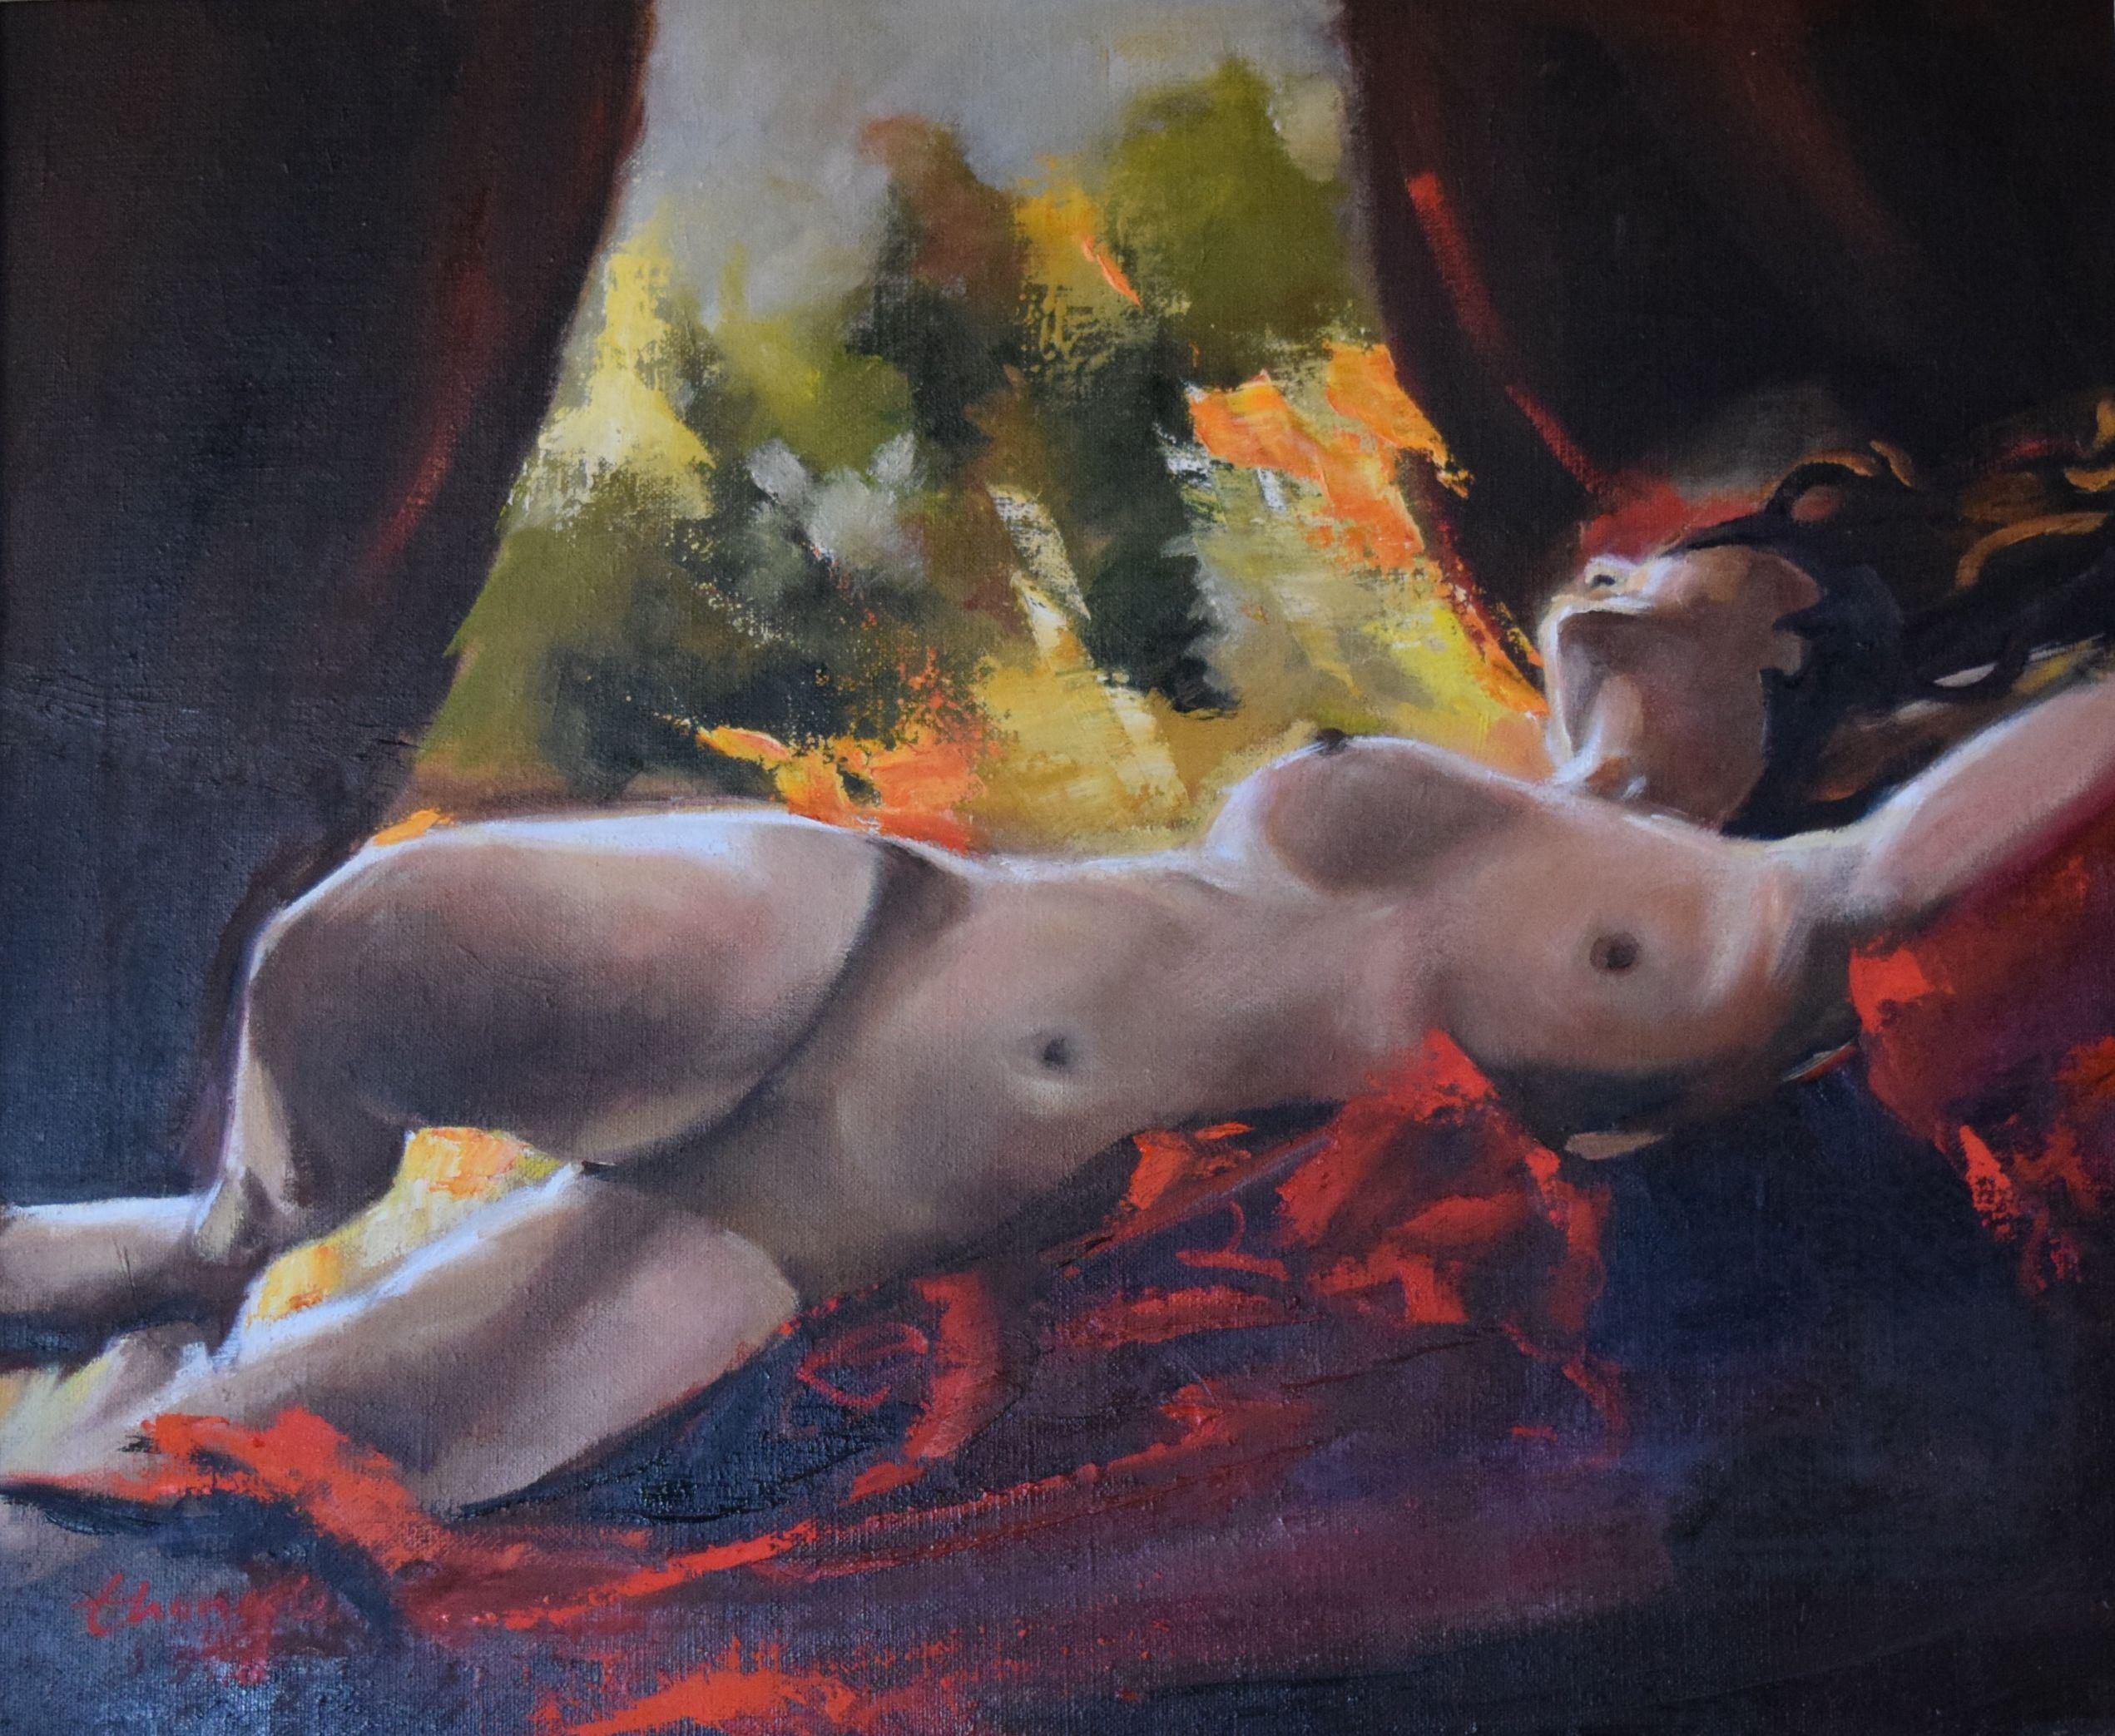 Thong Le Figurative Painting - fall apart, Painting, Oil on Canvas